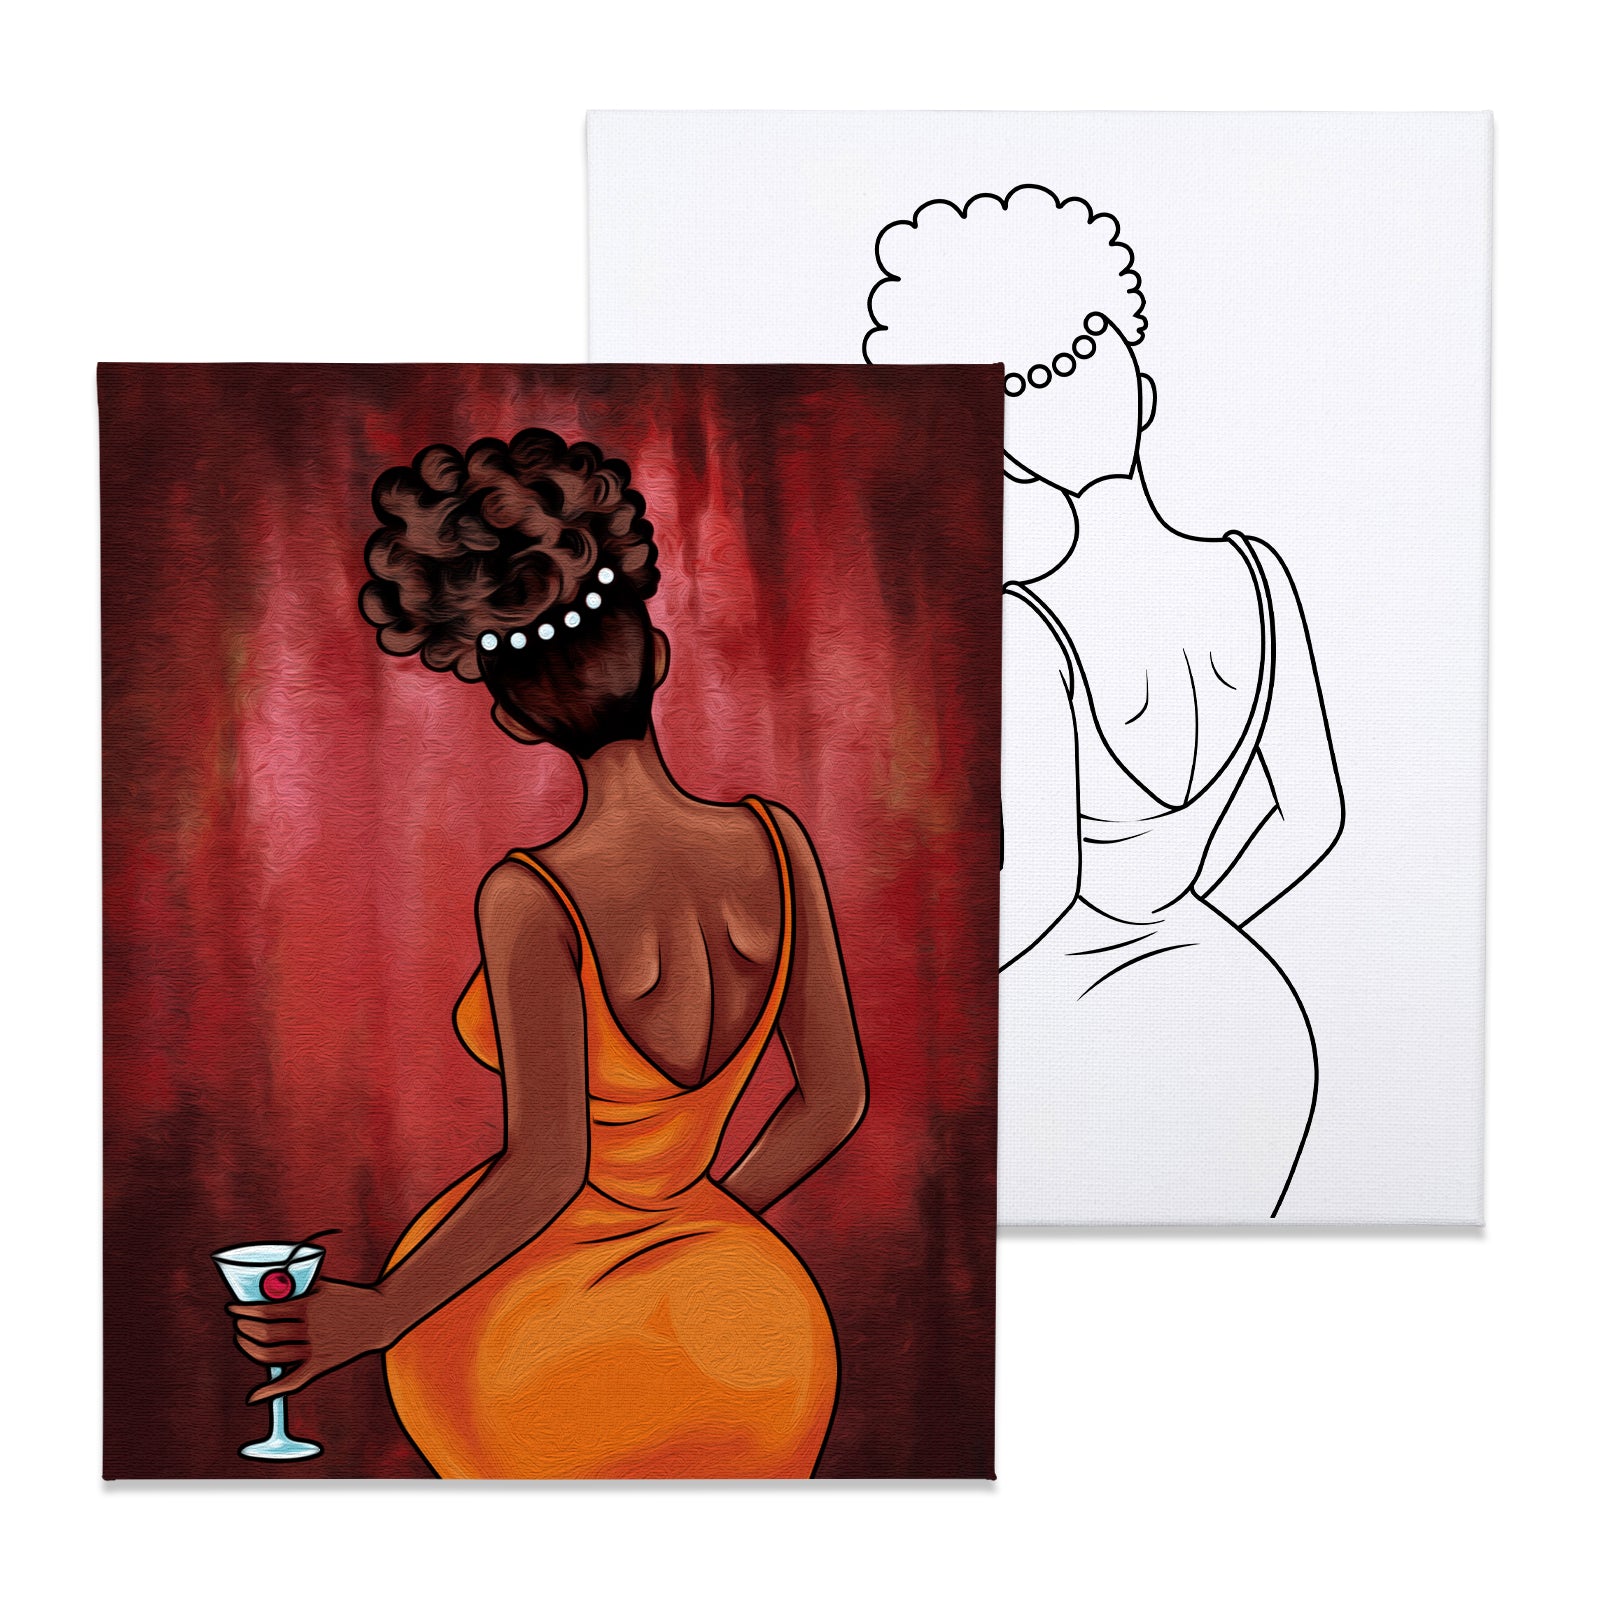 2 Pack Paint and Sip Canvas Painting Kit Pre Drawn Canvas for Painting for  Adult